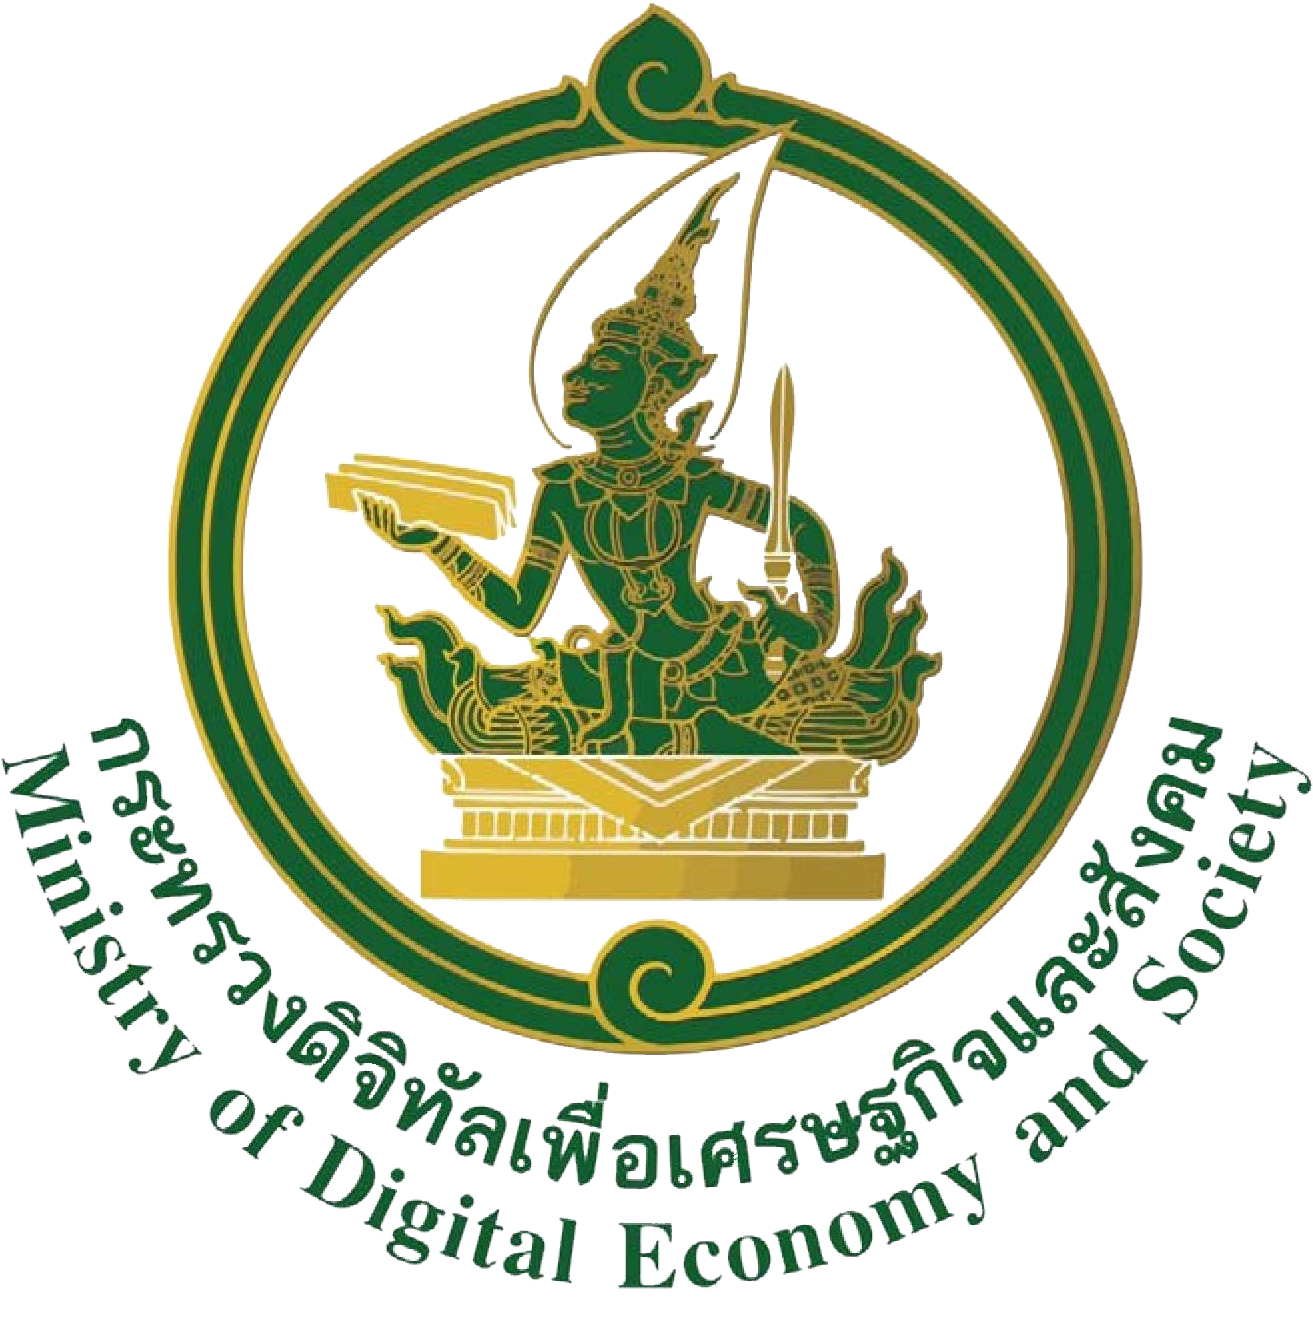 Emblem_of_the_Ministry_of_Digital_Economy_and_Society_of_Thailand.png